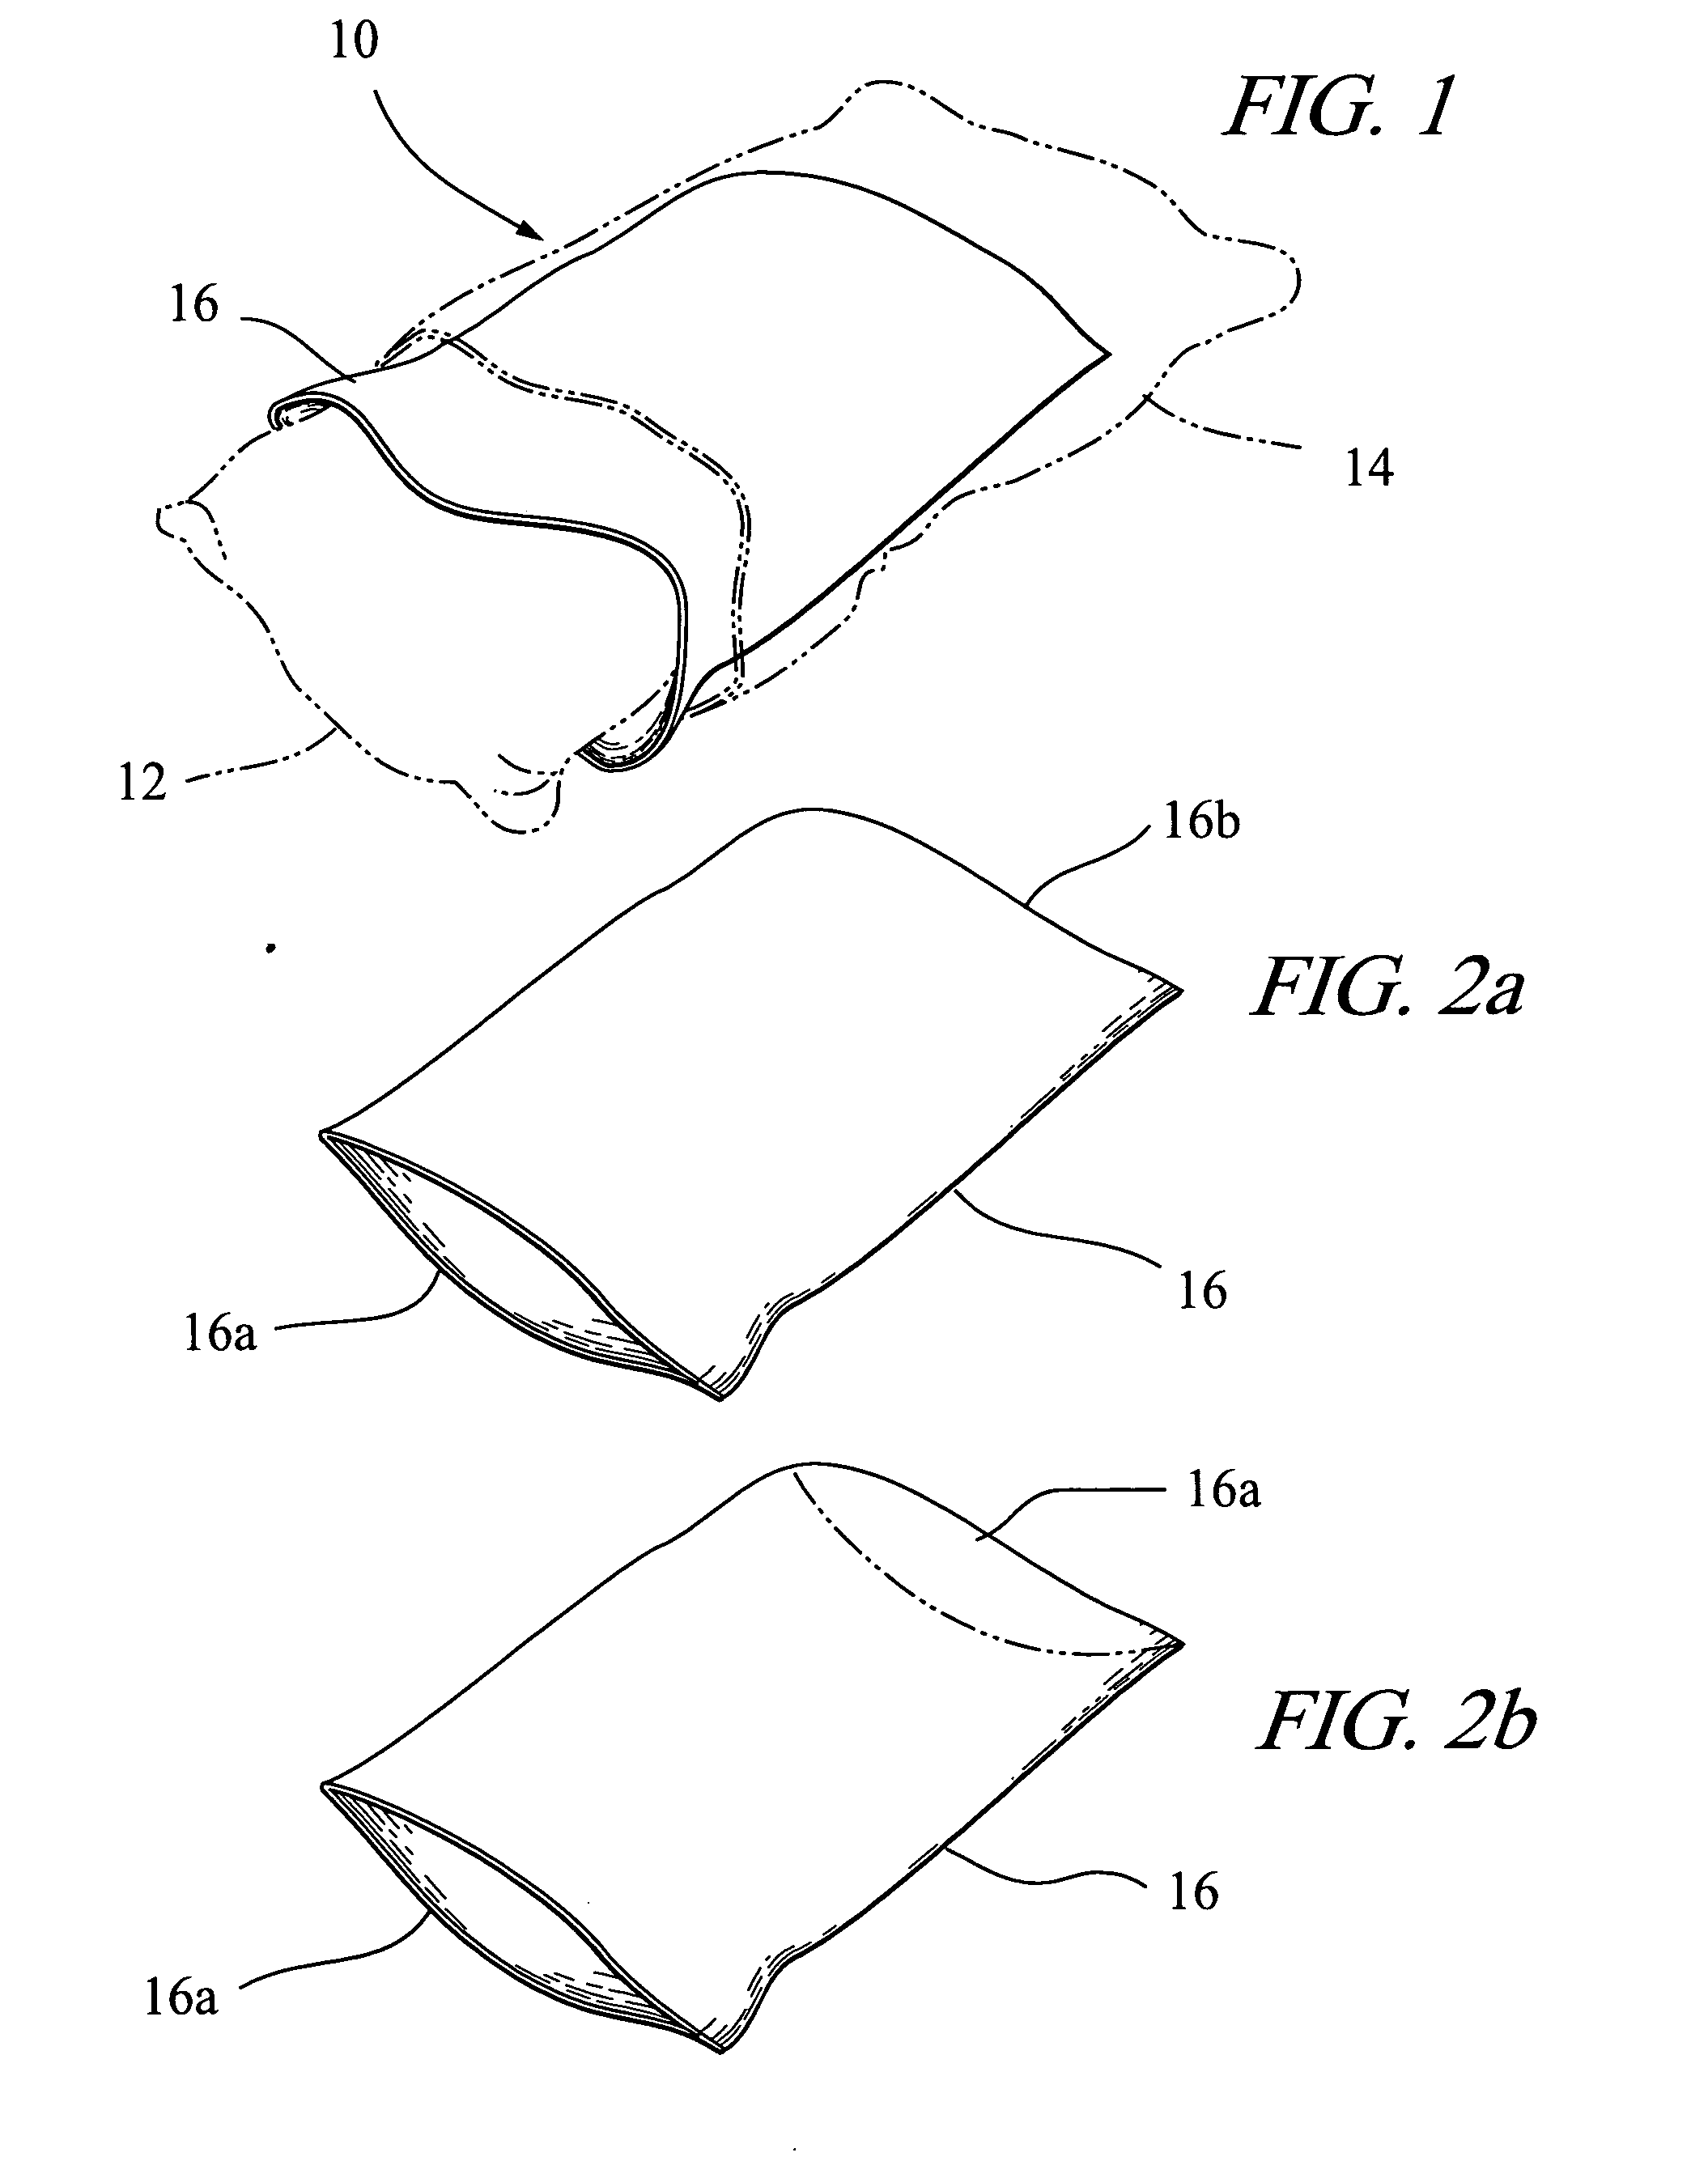 Easy breath pillow covering